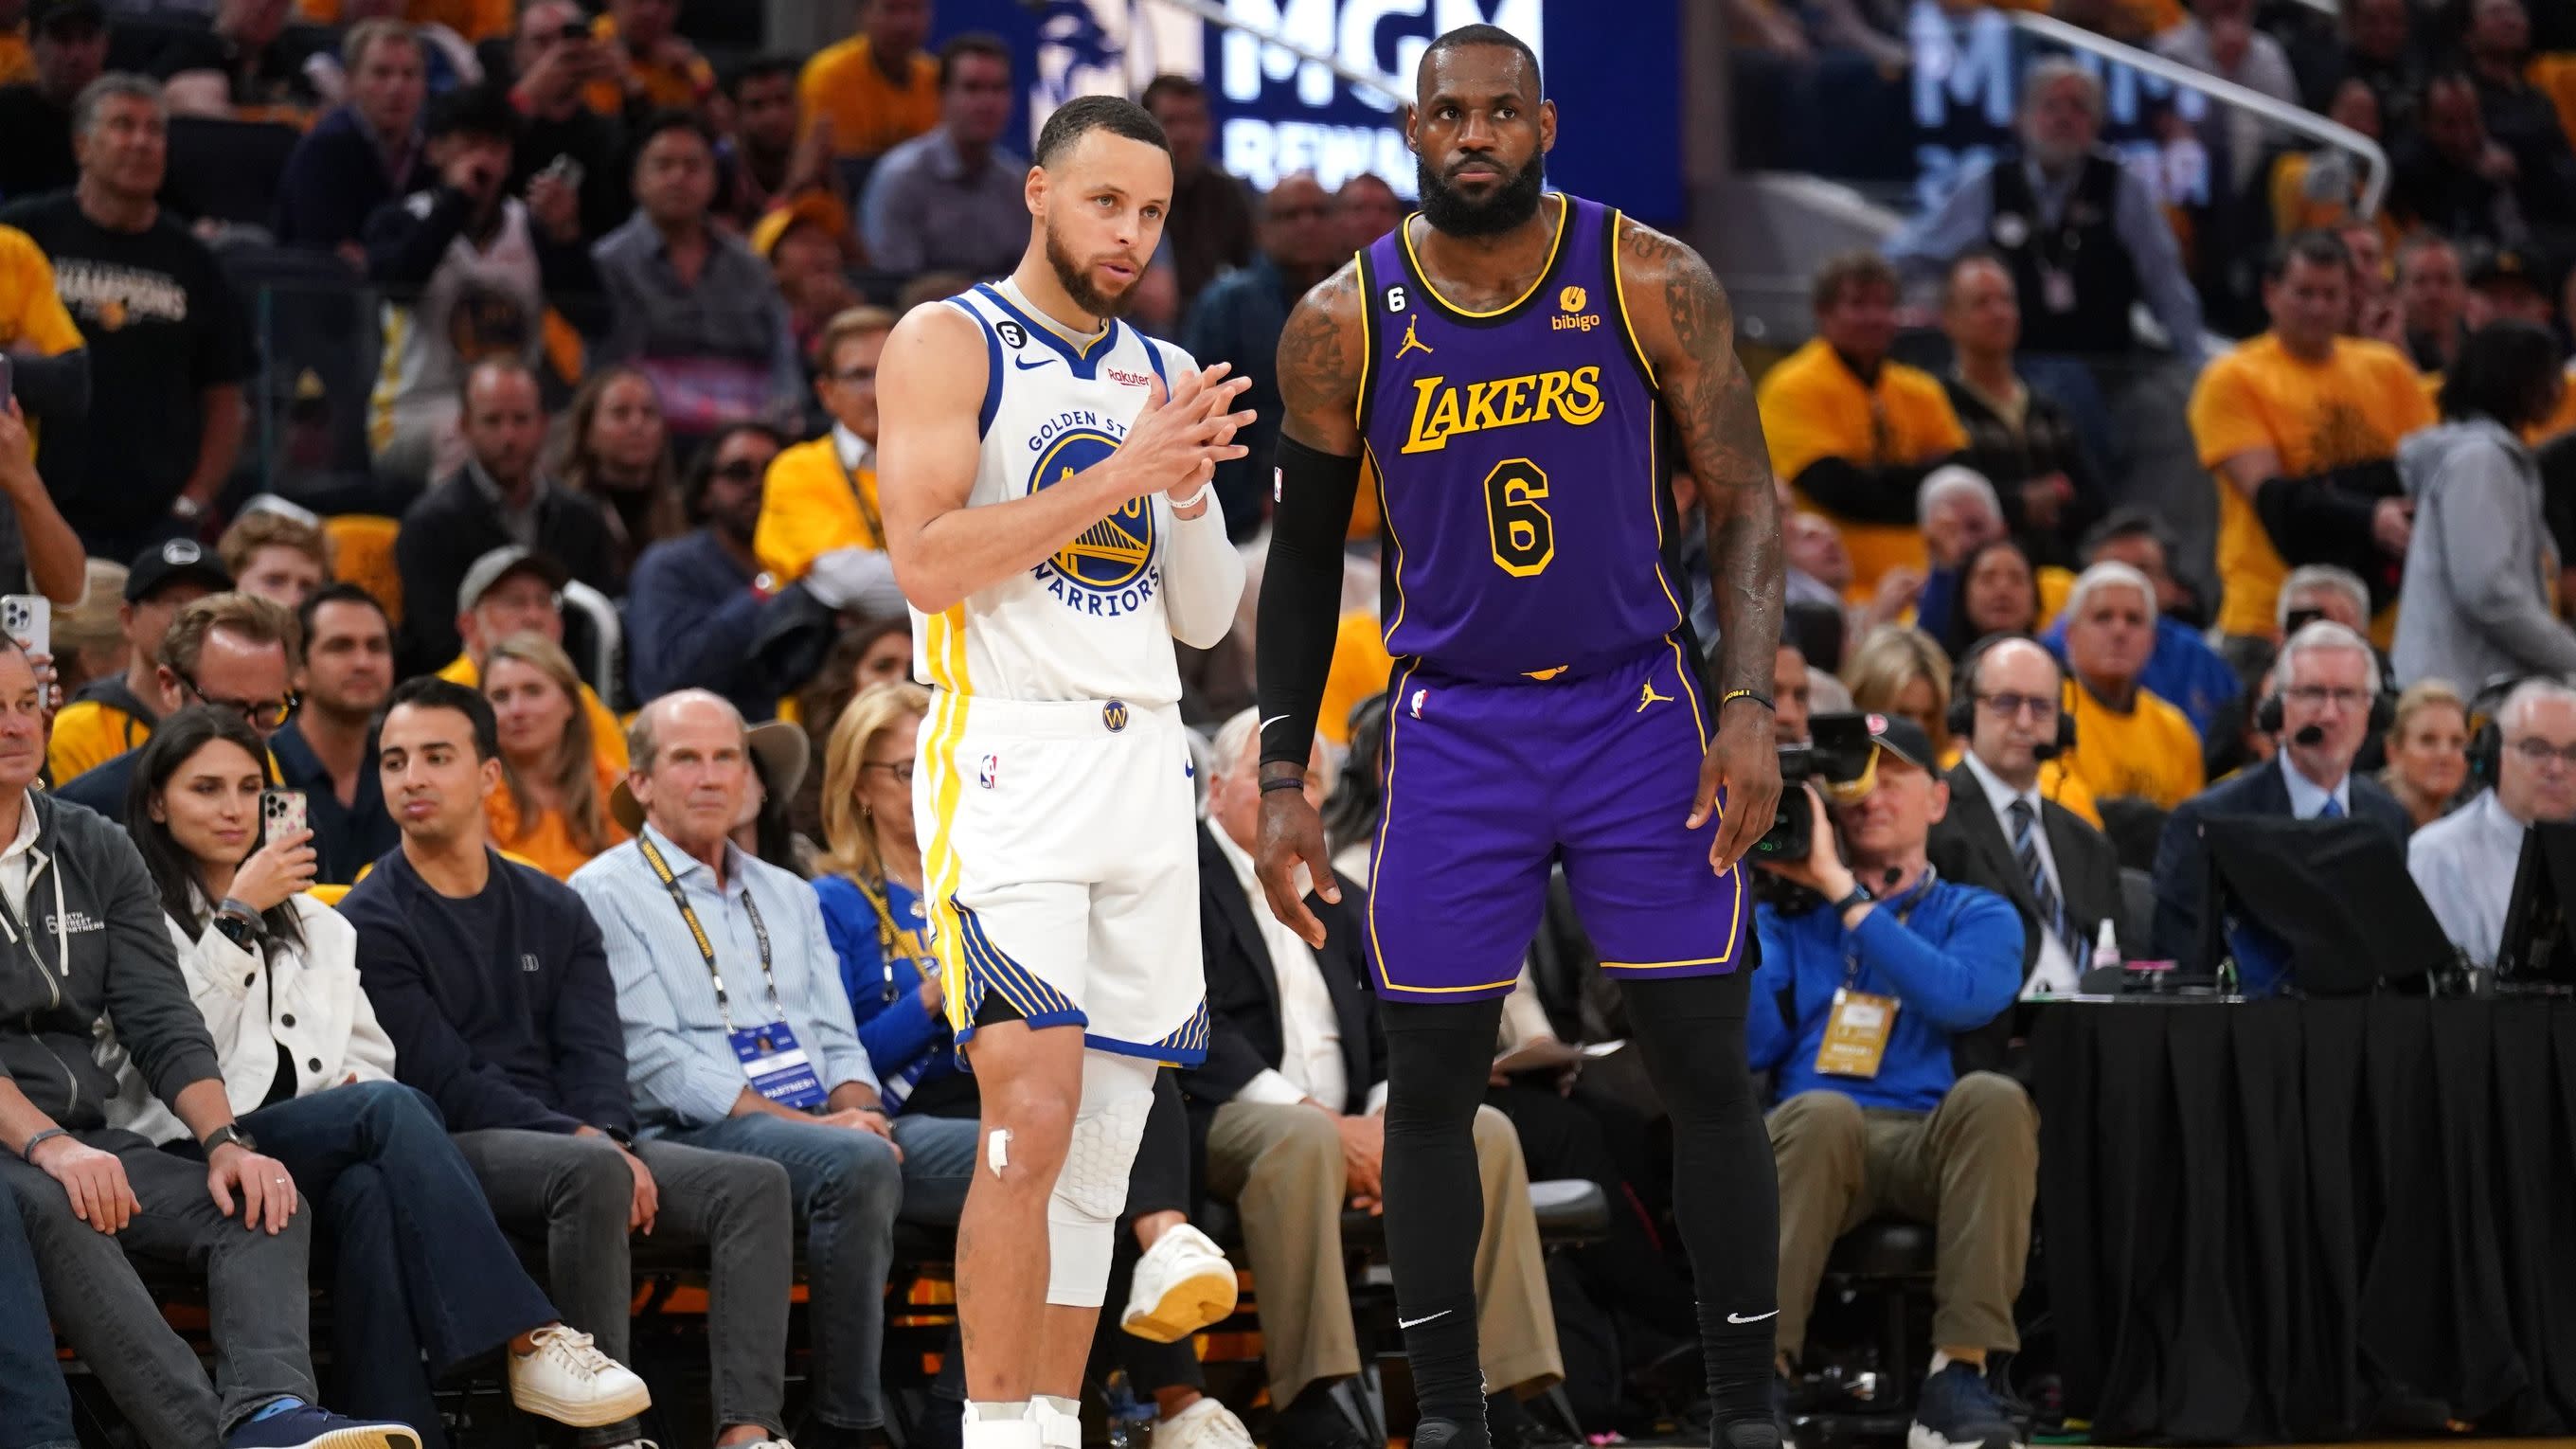 Skip believes Dubs-Lakers play-in game would be greatest matchup ever